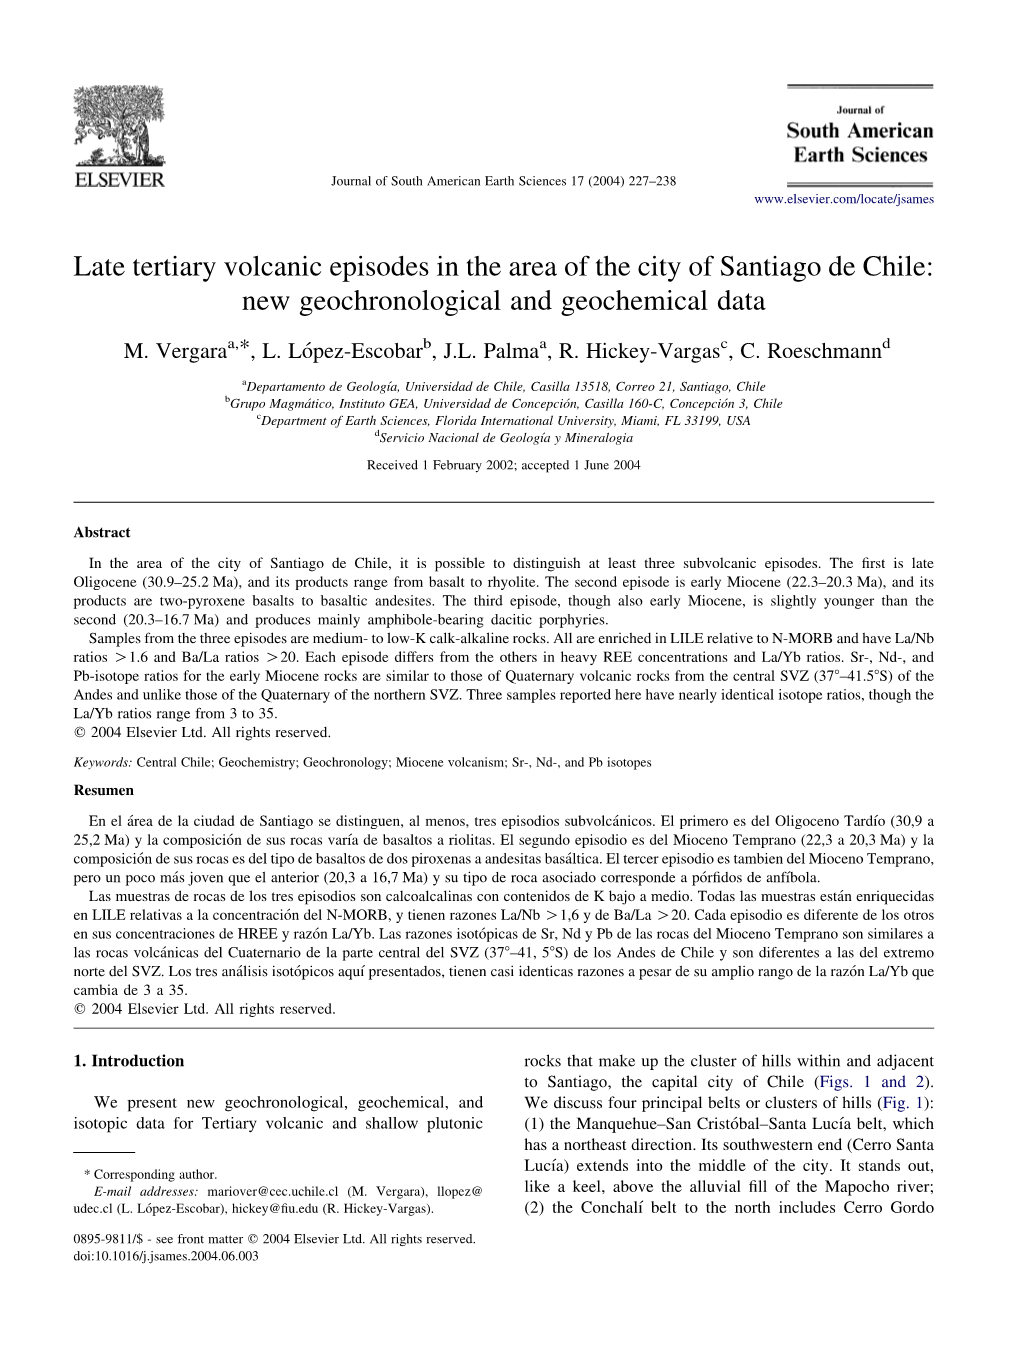 Late Tertiary Volcanic Episodes in the Area of the City of Santiago De Chile: New Geochronological and Geochemical Data